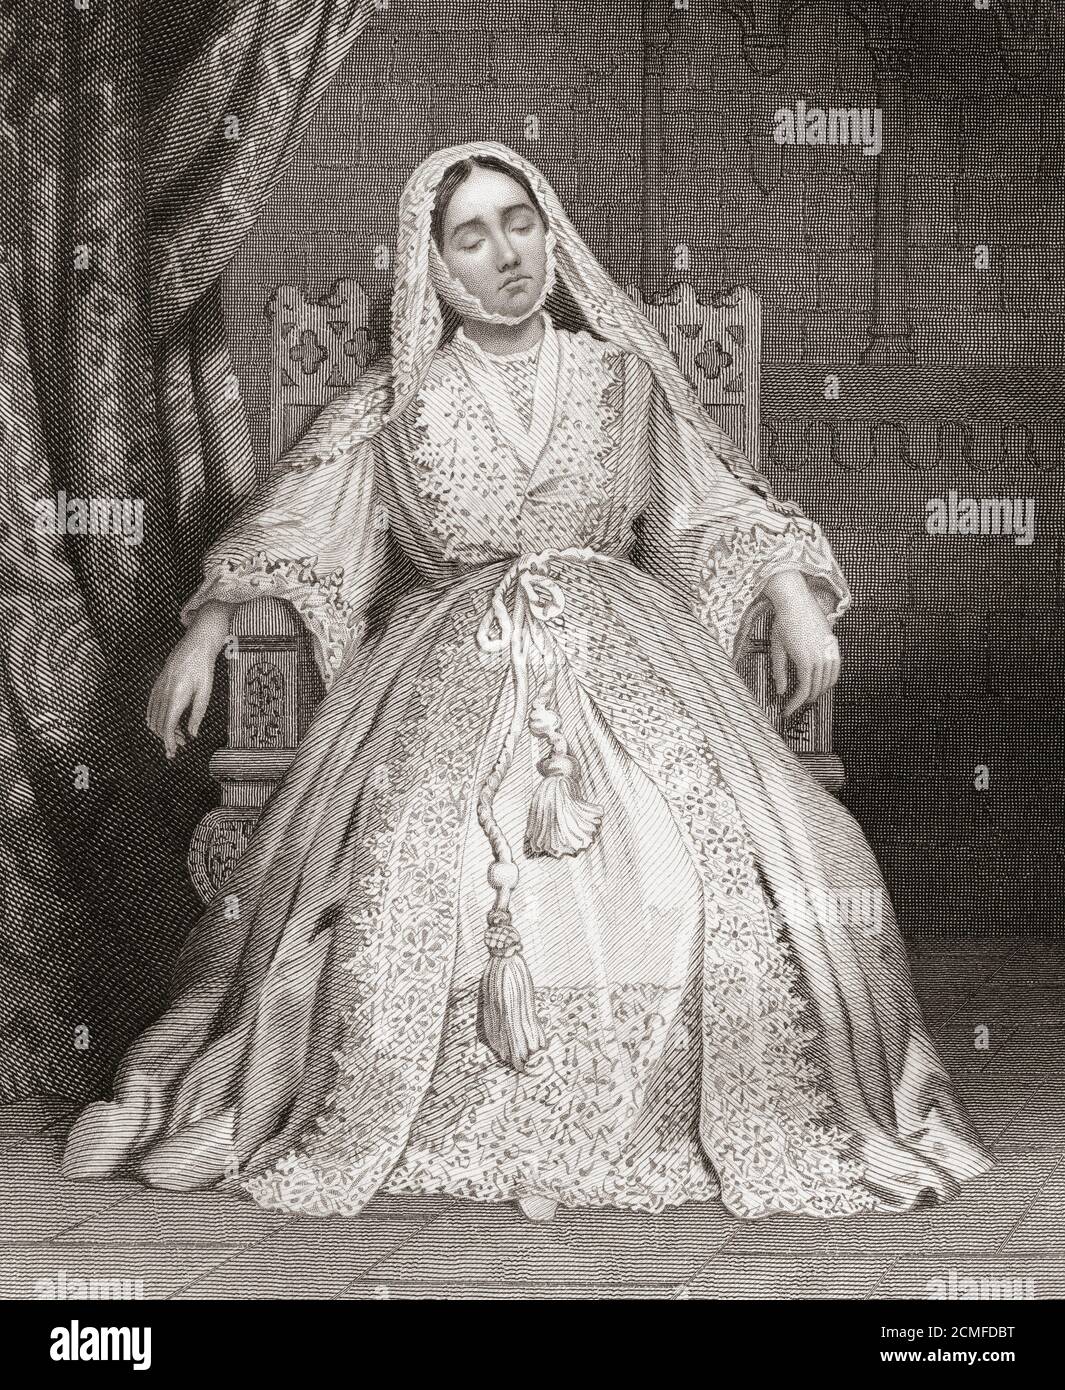 Miss Glynn in the role of Queen Katherine from Shakespeare's play Henry VIII.  Isabella Glyn, 1823 – 1889.  Victorian-era Shakespearean actress. Stock Photo